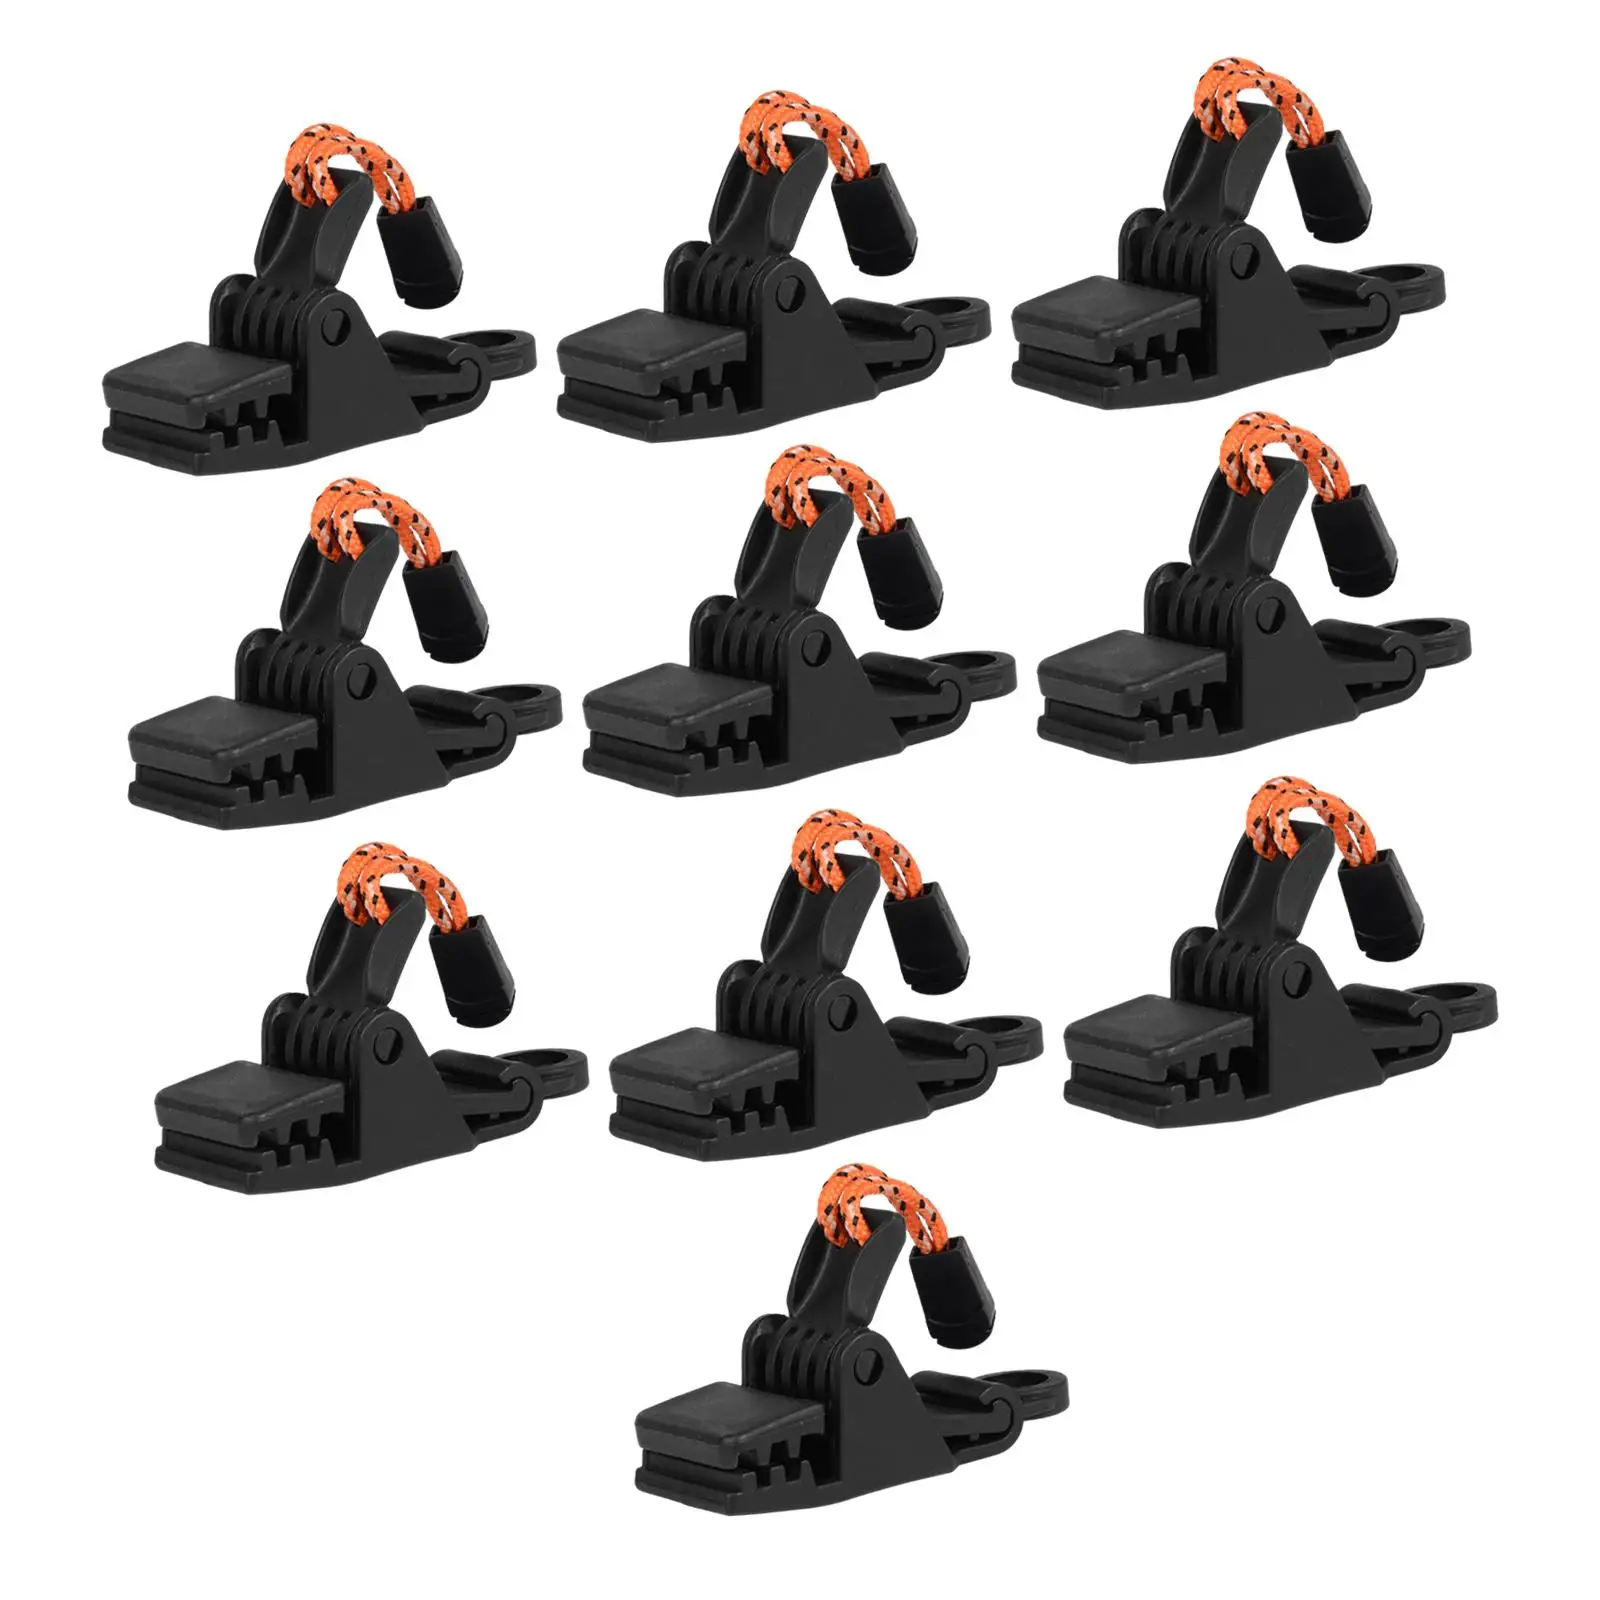 10Pcs Tarp Clips Reusable Awning Clamps Canopy Tent Clips Clamp for Car Covers Camping Backpacking Hiking Swimming Pool Covers